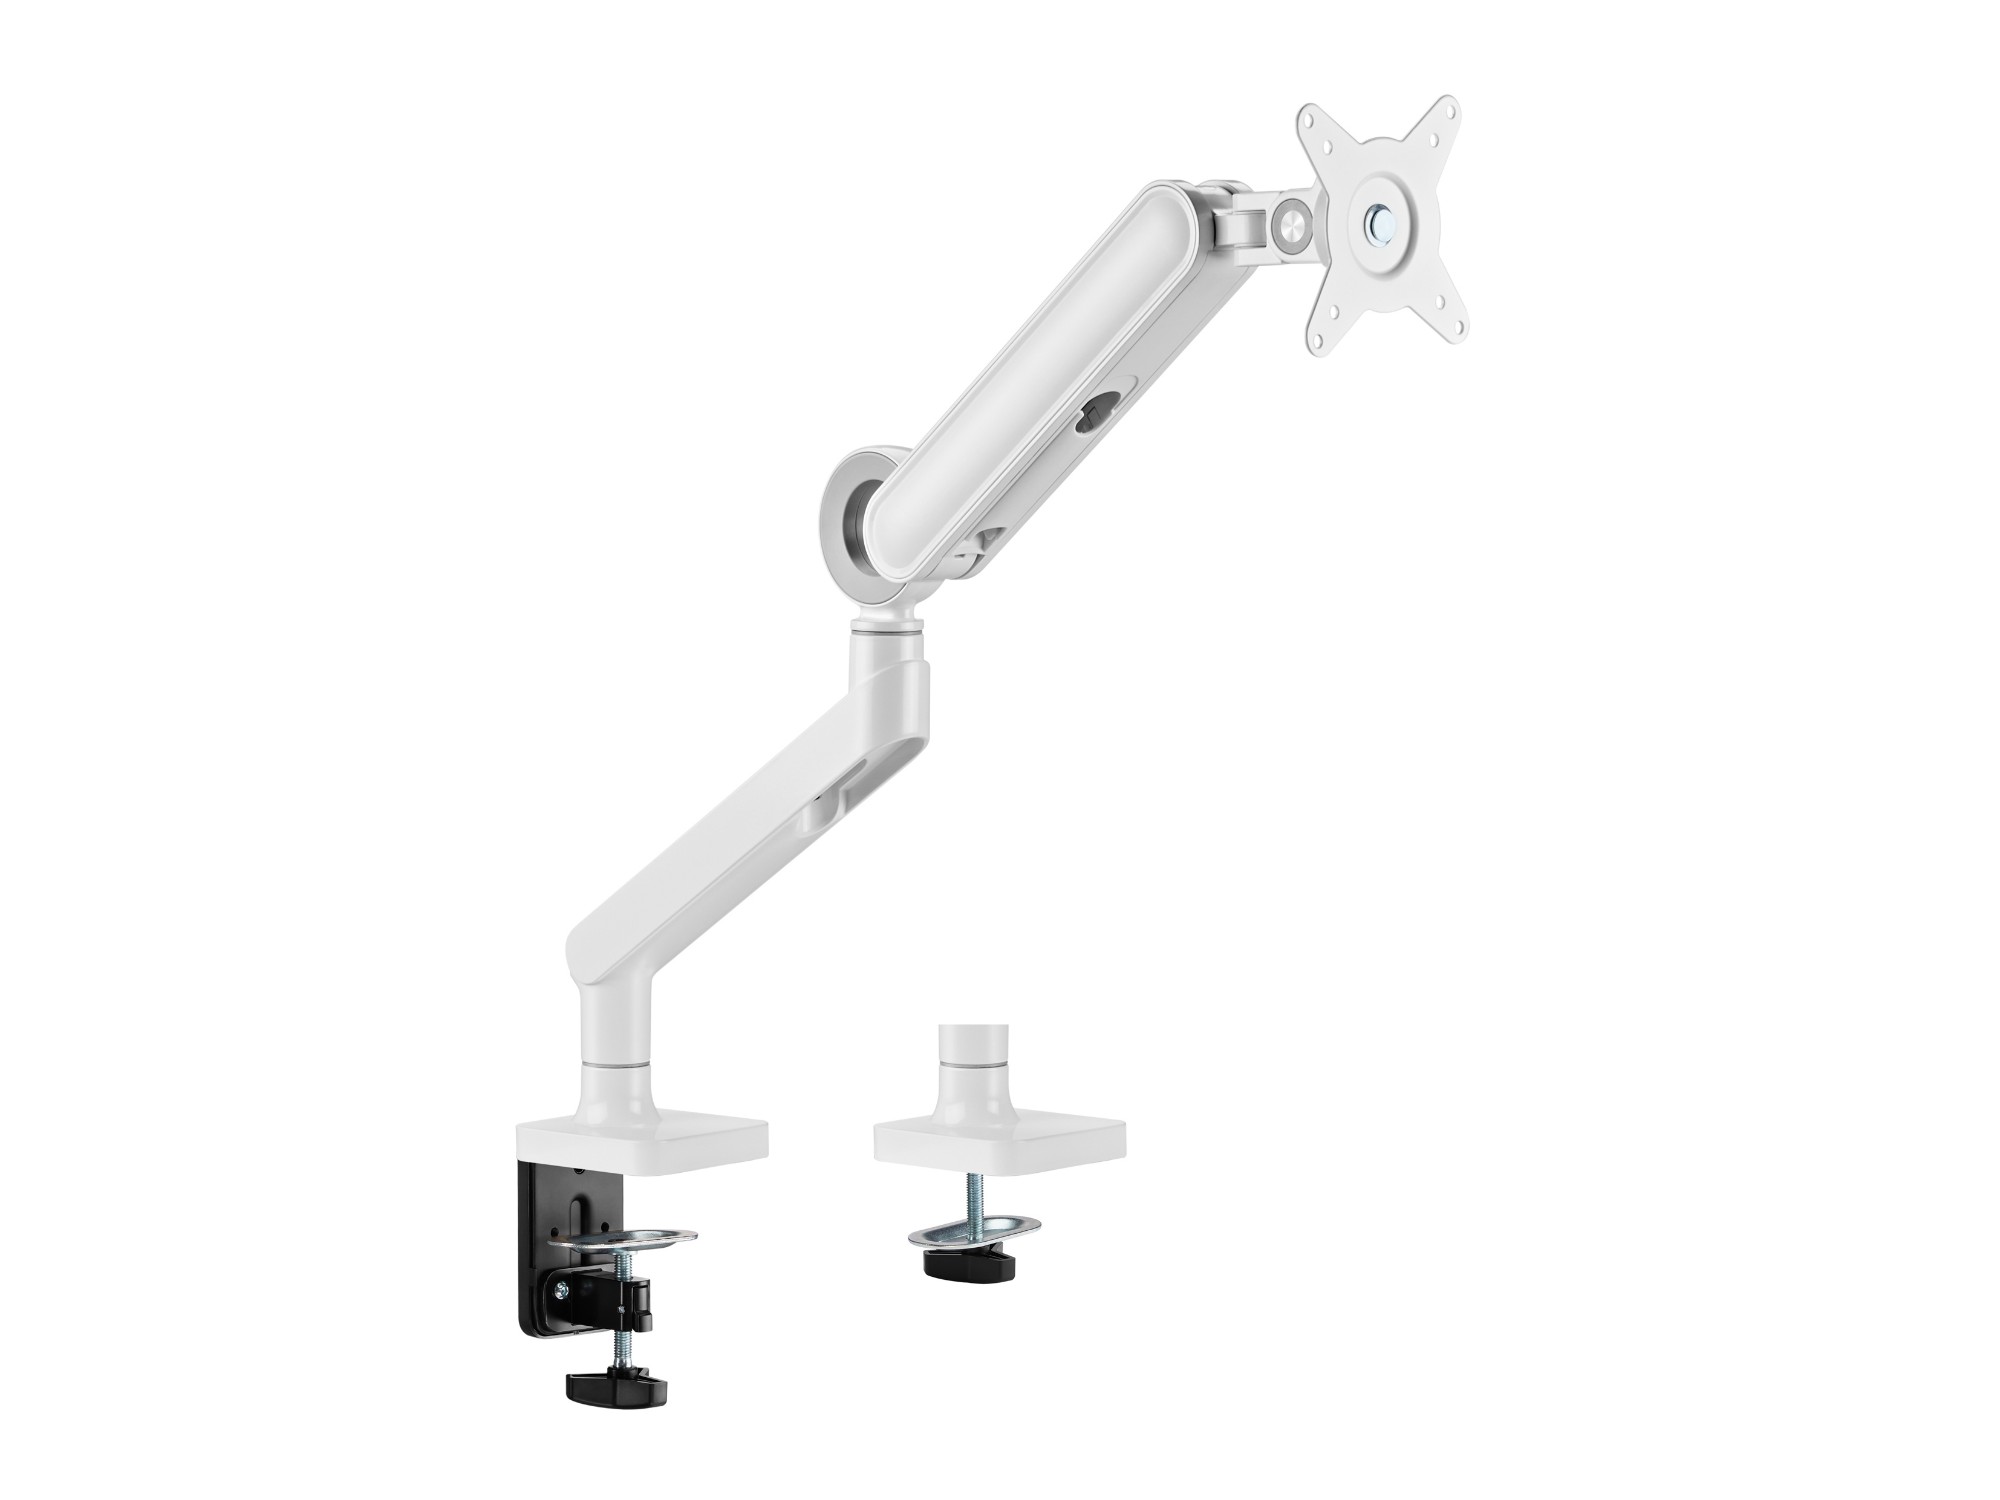 Photos - Other for Computer LevelOne Equip 650185 17-35 Premium Monitor Desk Mount Bracket; White 